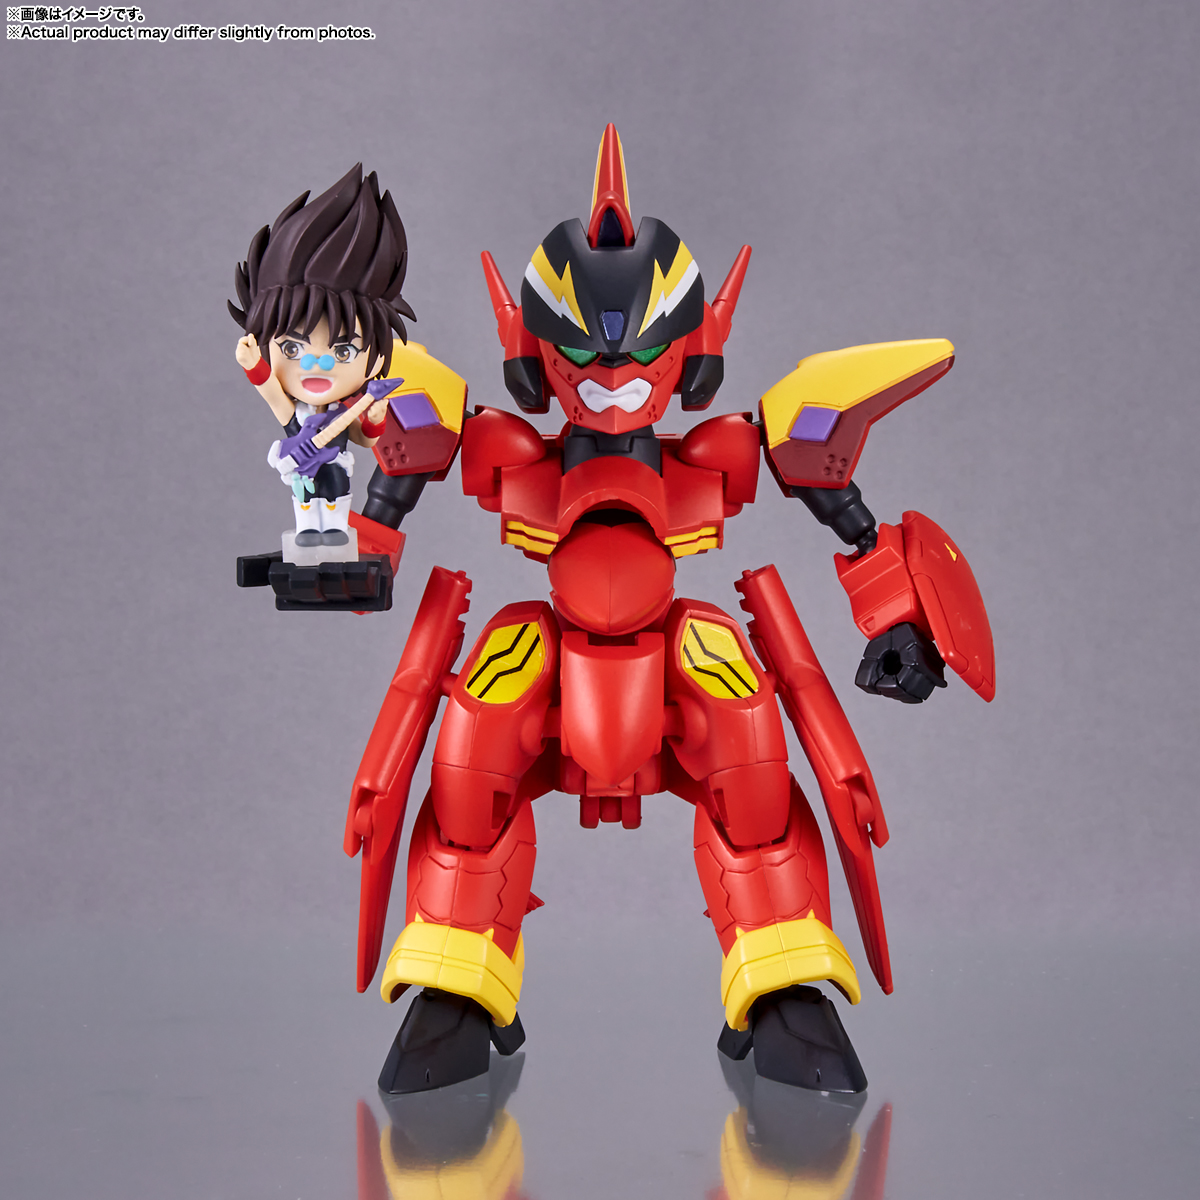 macross-7-vf-19-custom-fire-valkyrie-and-basara-nekki-tiny-session-action-figure-set image count 1